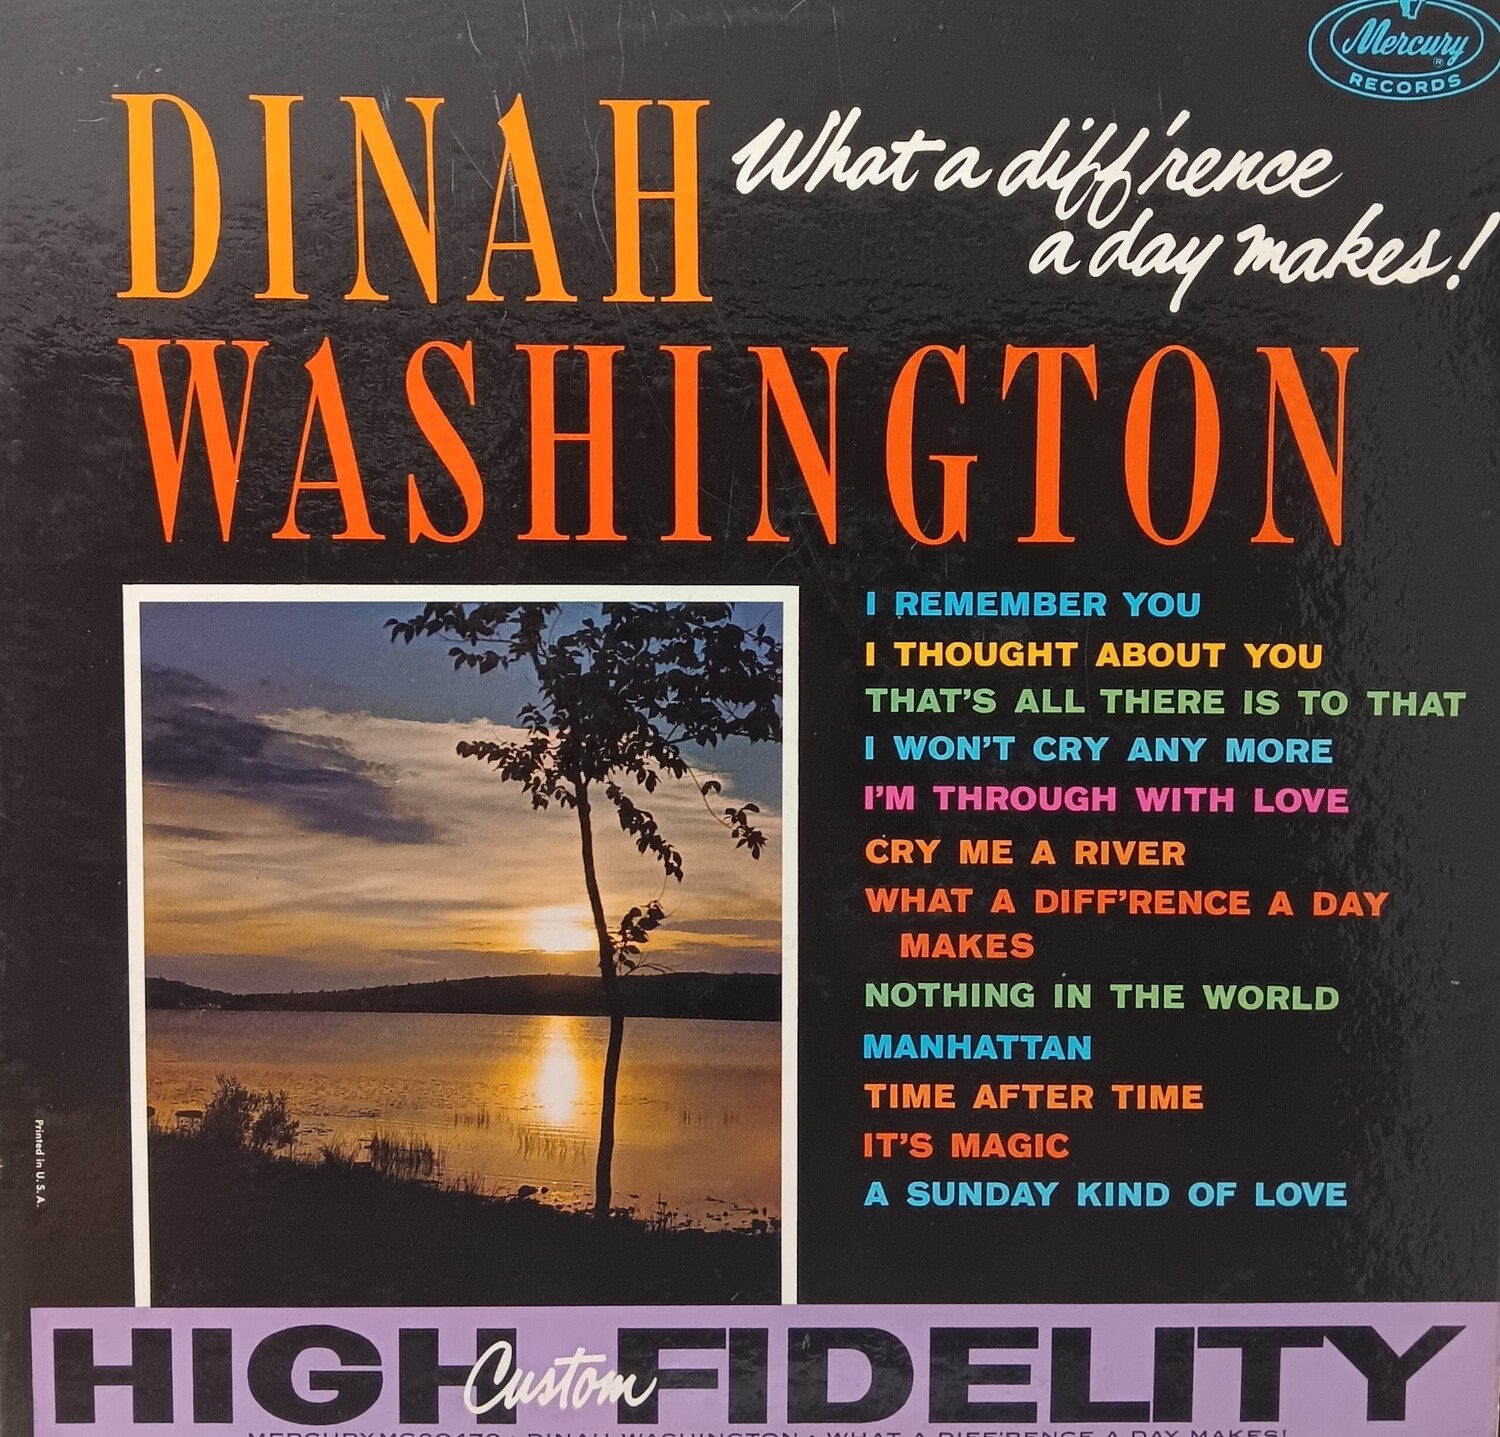 DINAH WASHINGTON - What's a diff'rence a day makes